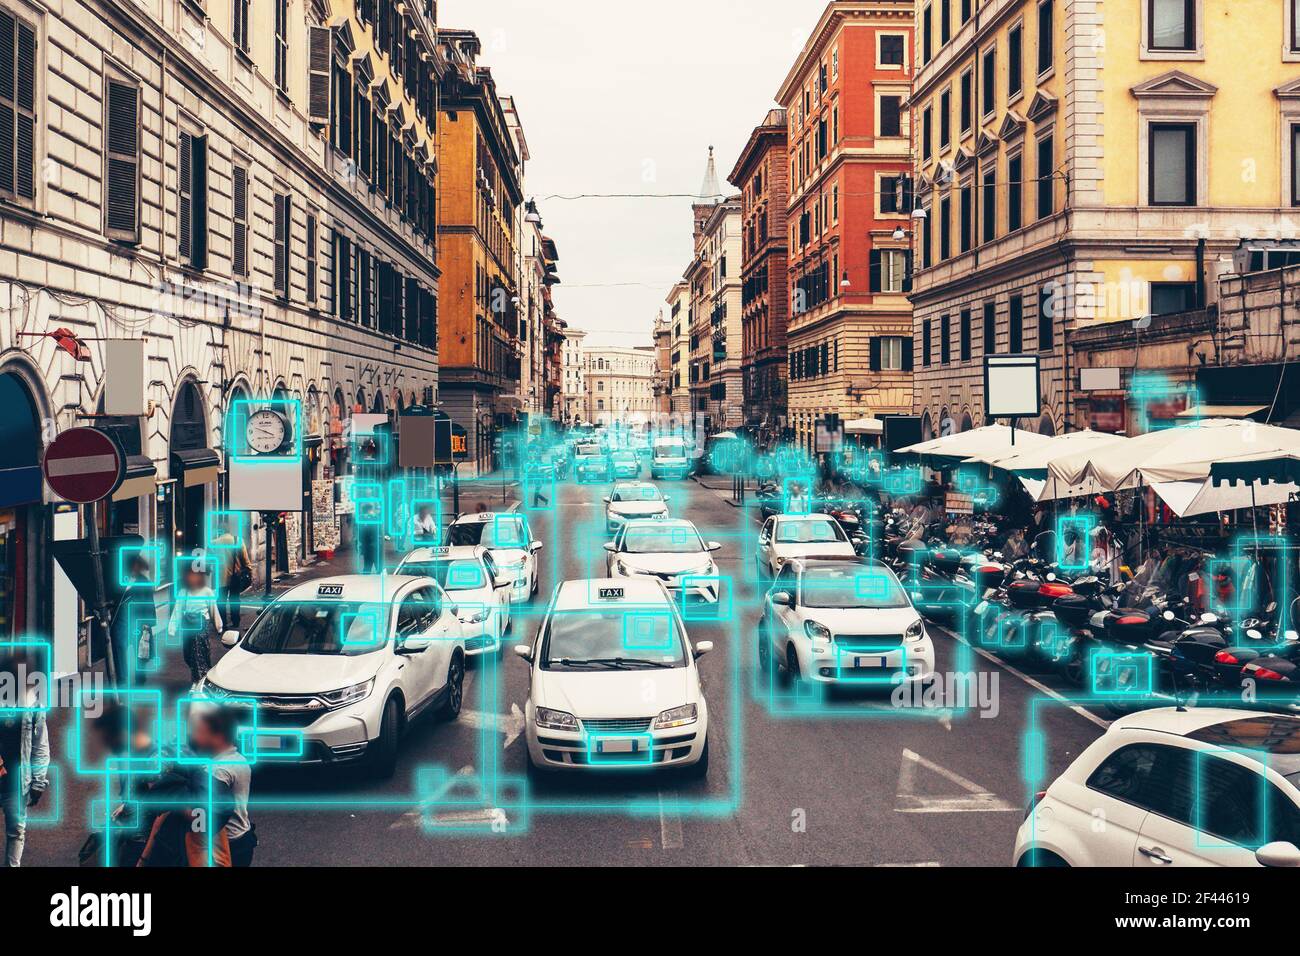 Detection and recognition of cars and faces of people. AI analyze BIG DATA. Artificial intelligence AI concept as technology for safe city in future. Stock Photo